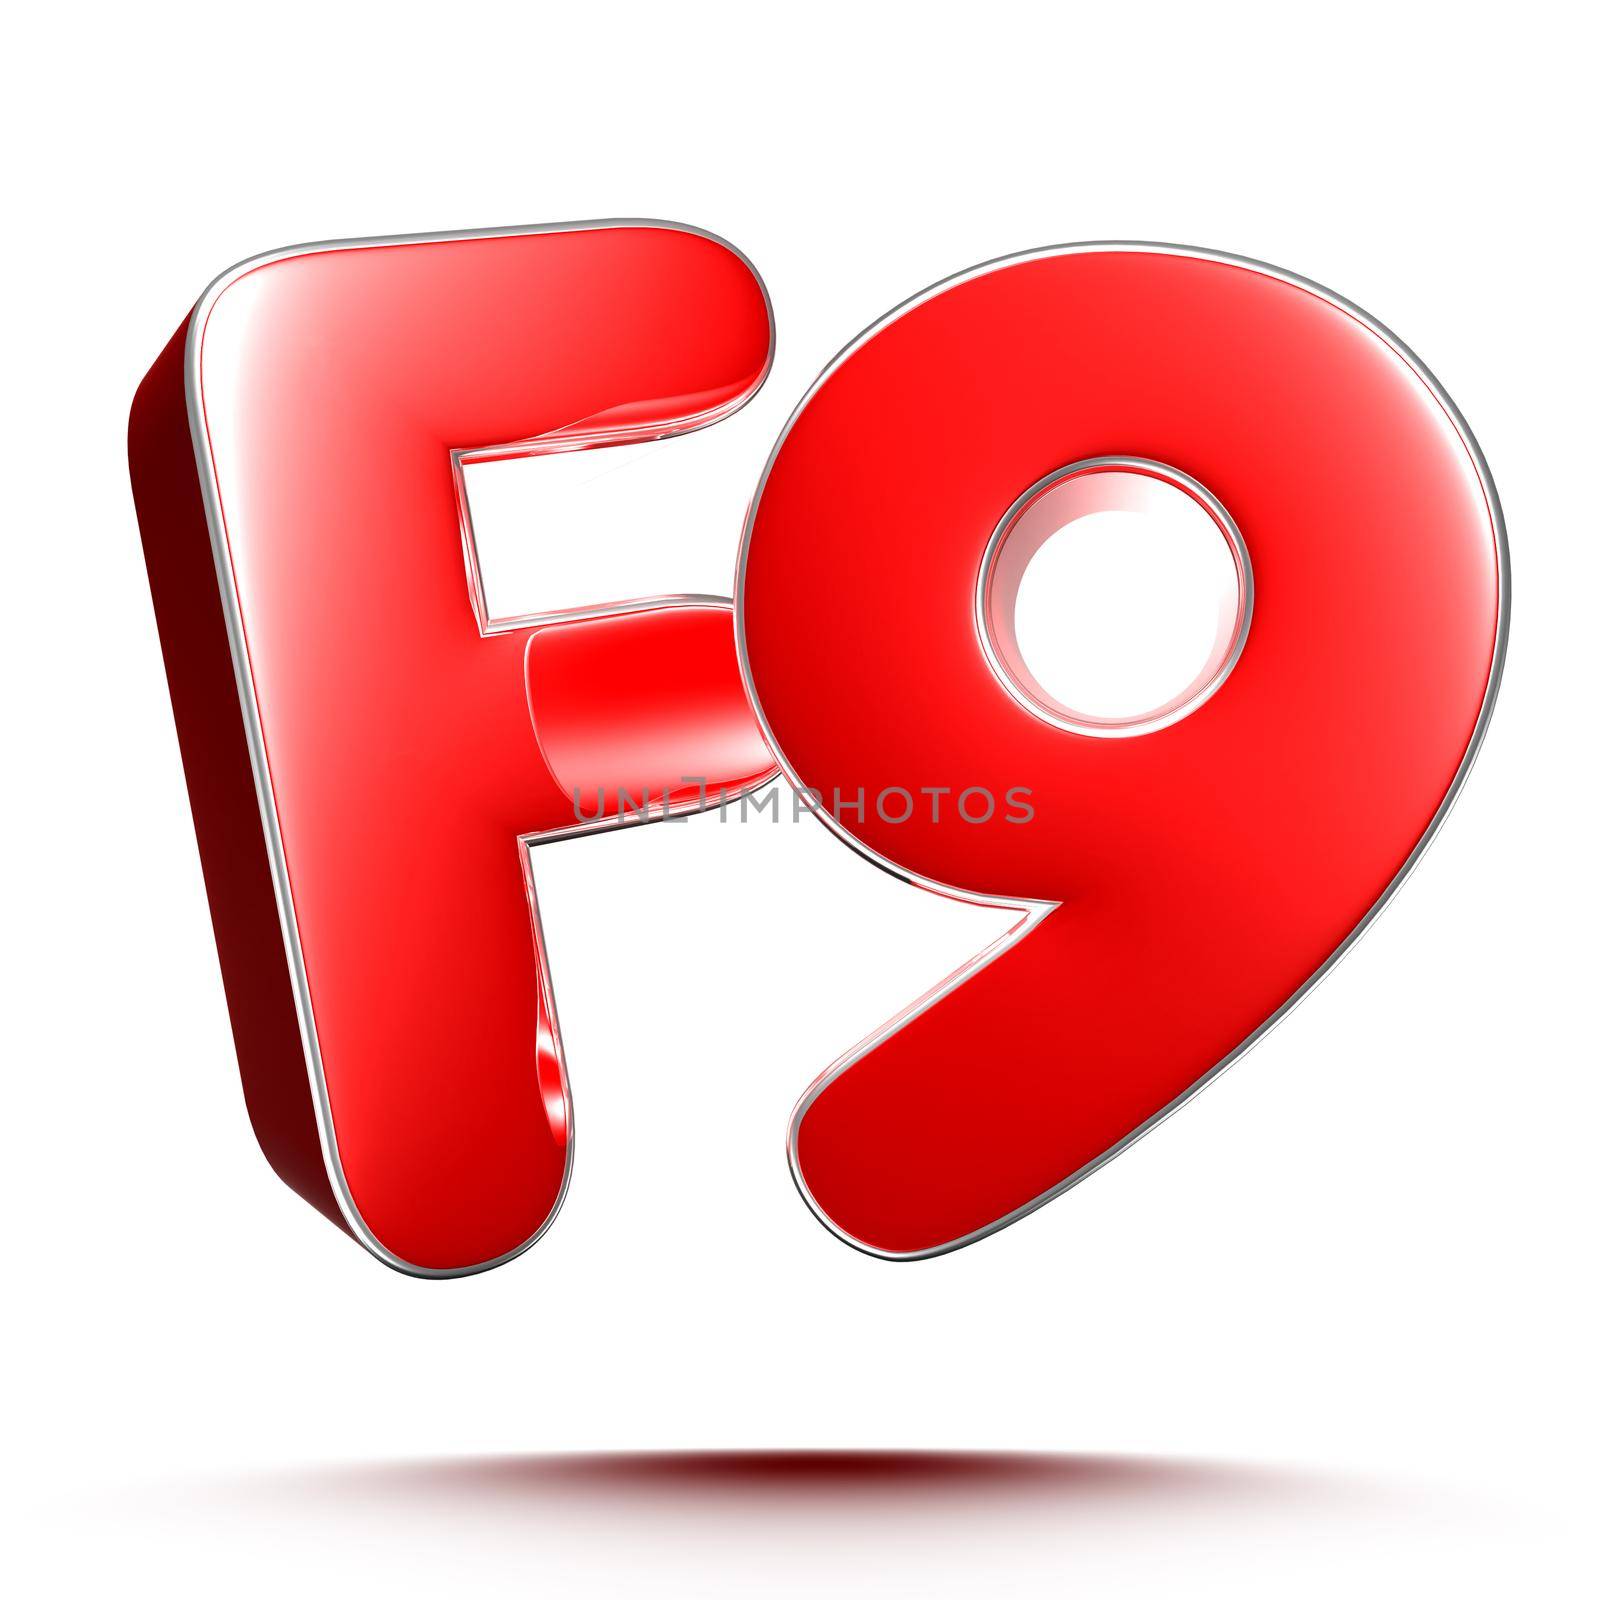 F9 red 3D illustration on white background with clipping path.